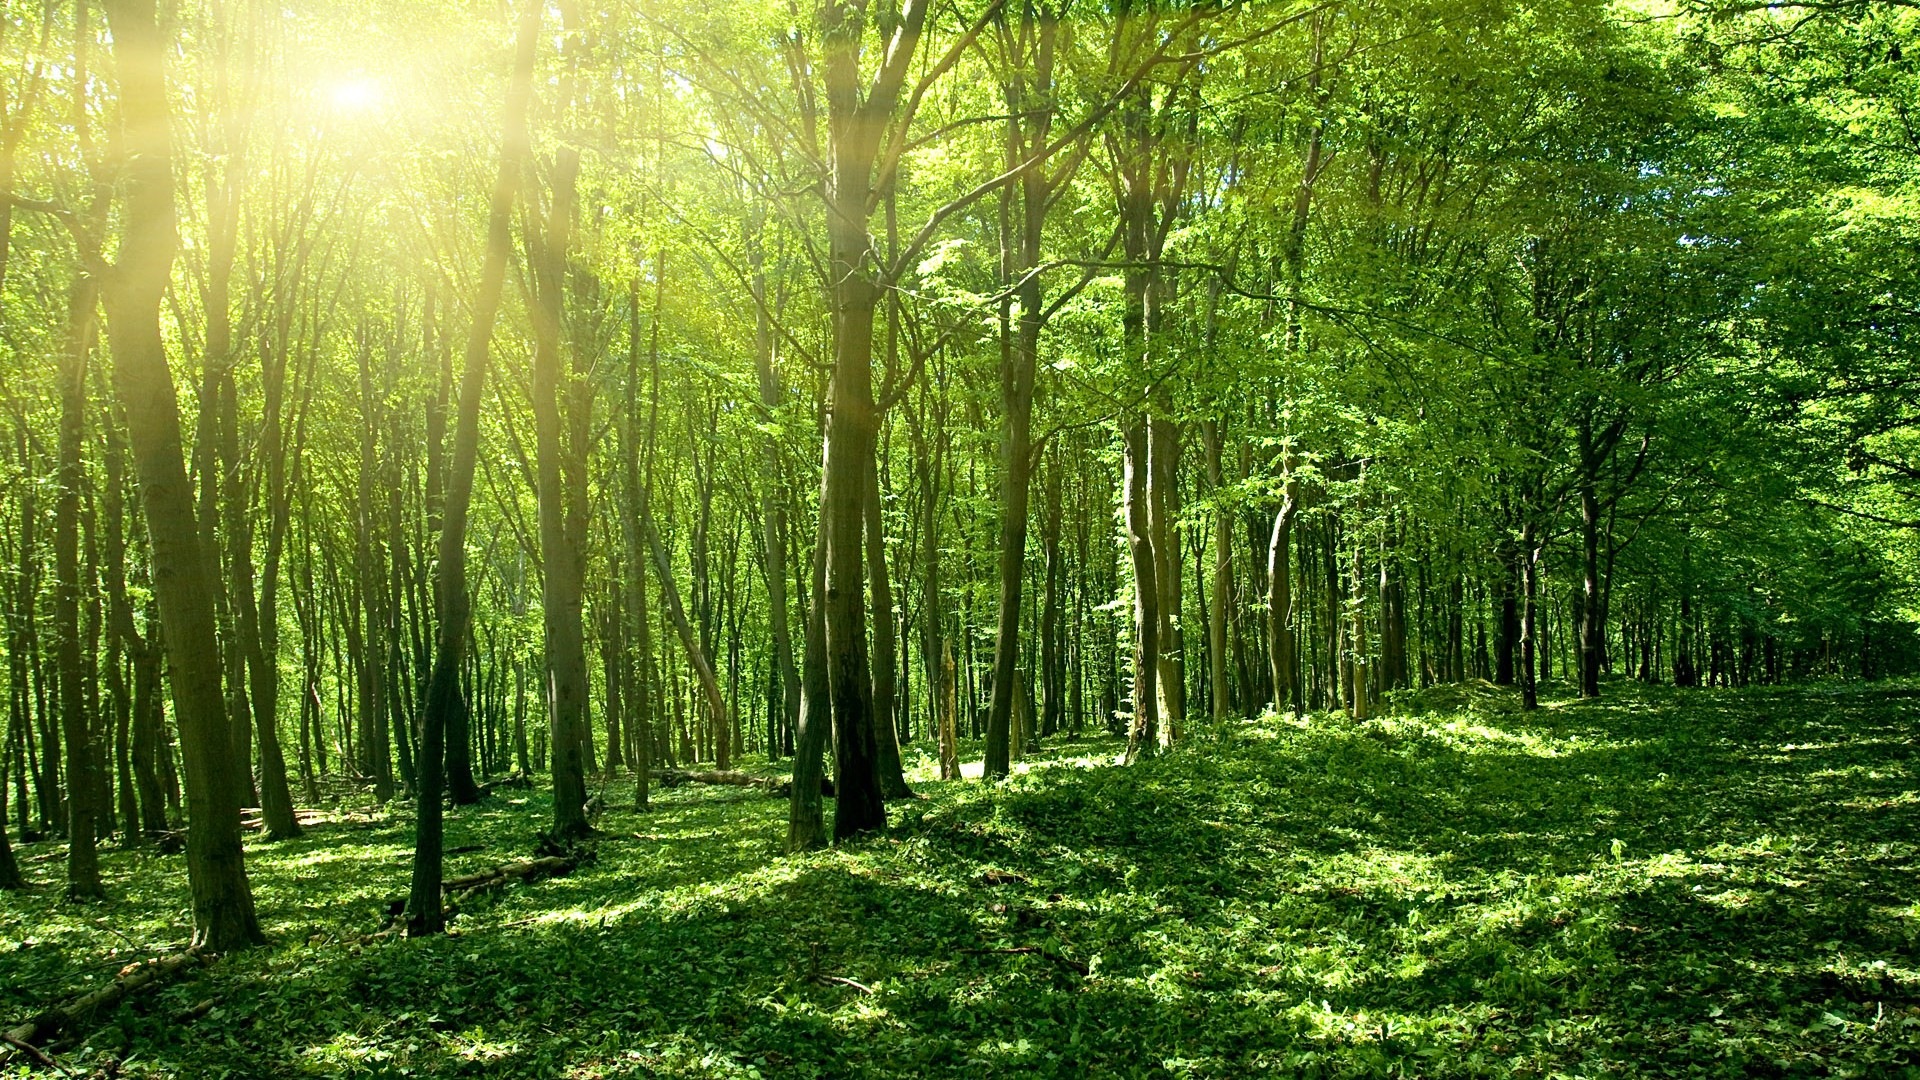 Windows 8 theme forest scenery HD wallpapers #3 - 1920x1080